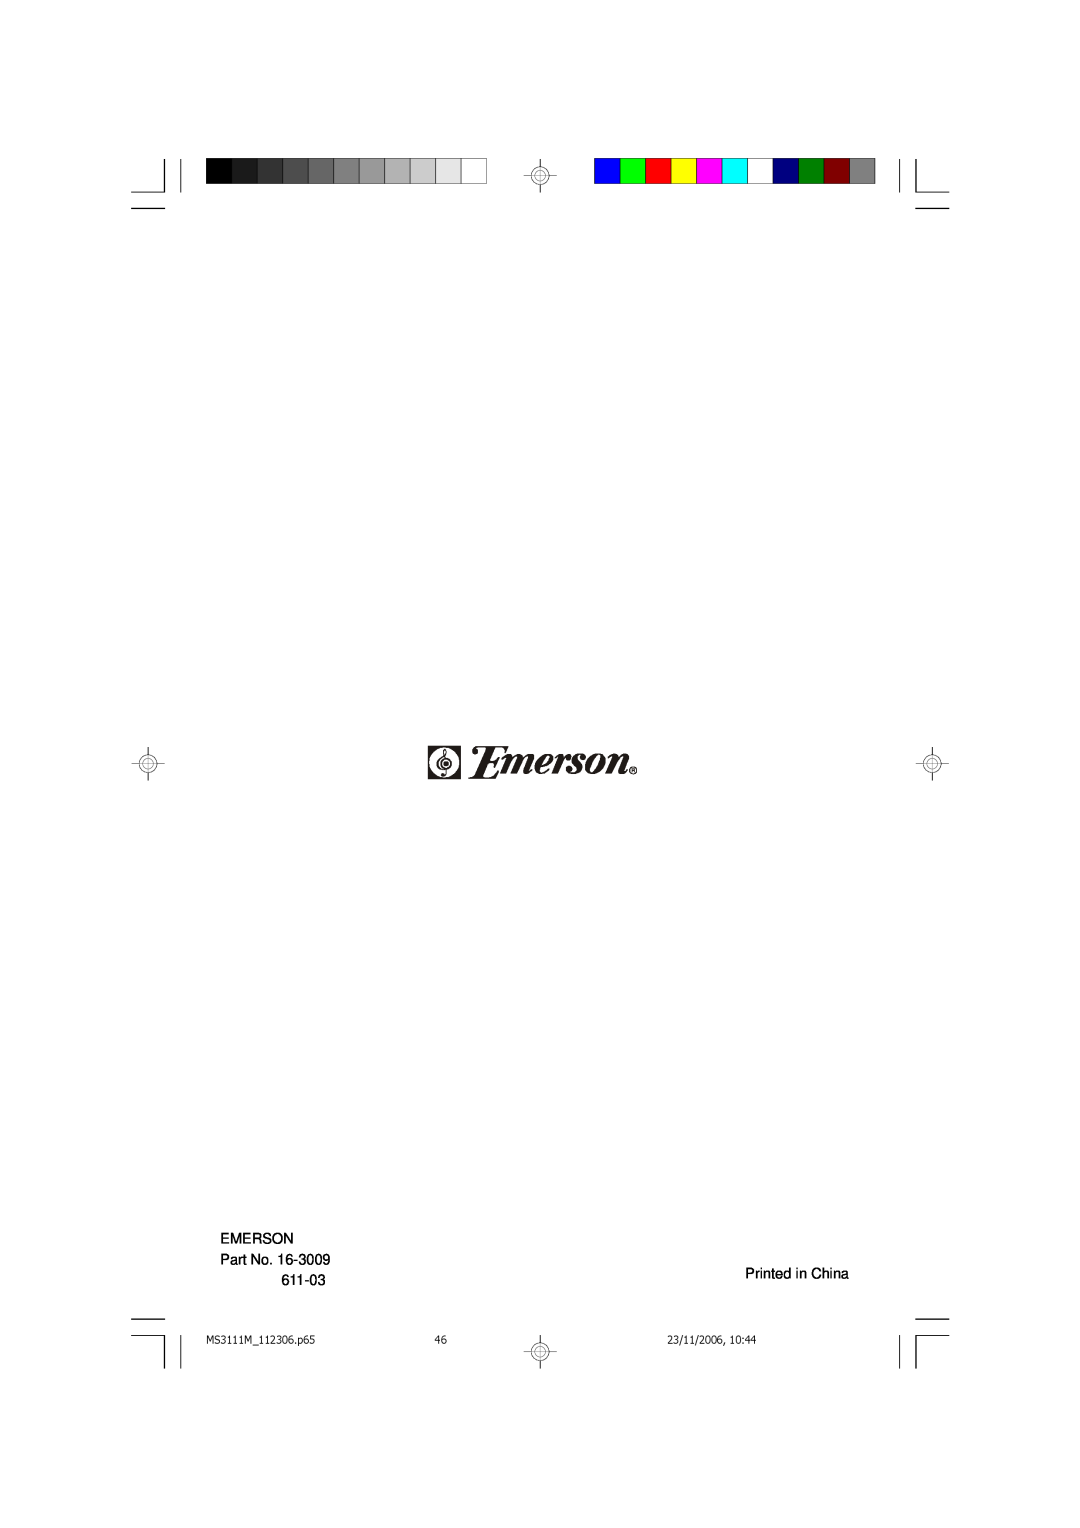 Emerson owner manual Emerson, 611-03, MS3111M 112306.p65, 23/11/2006 